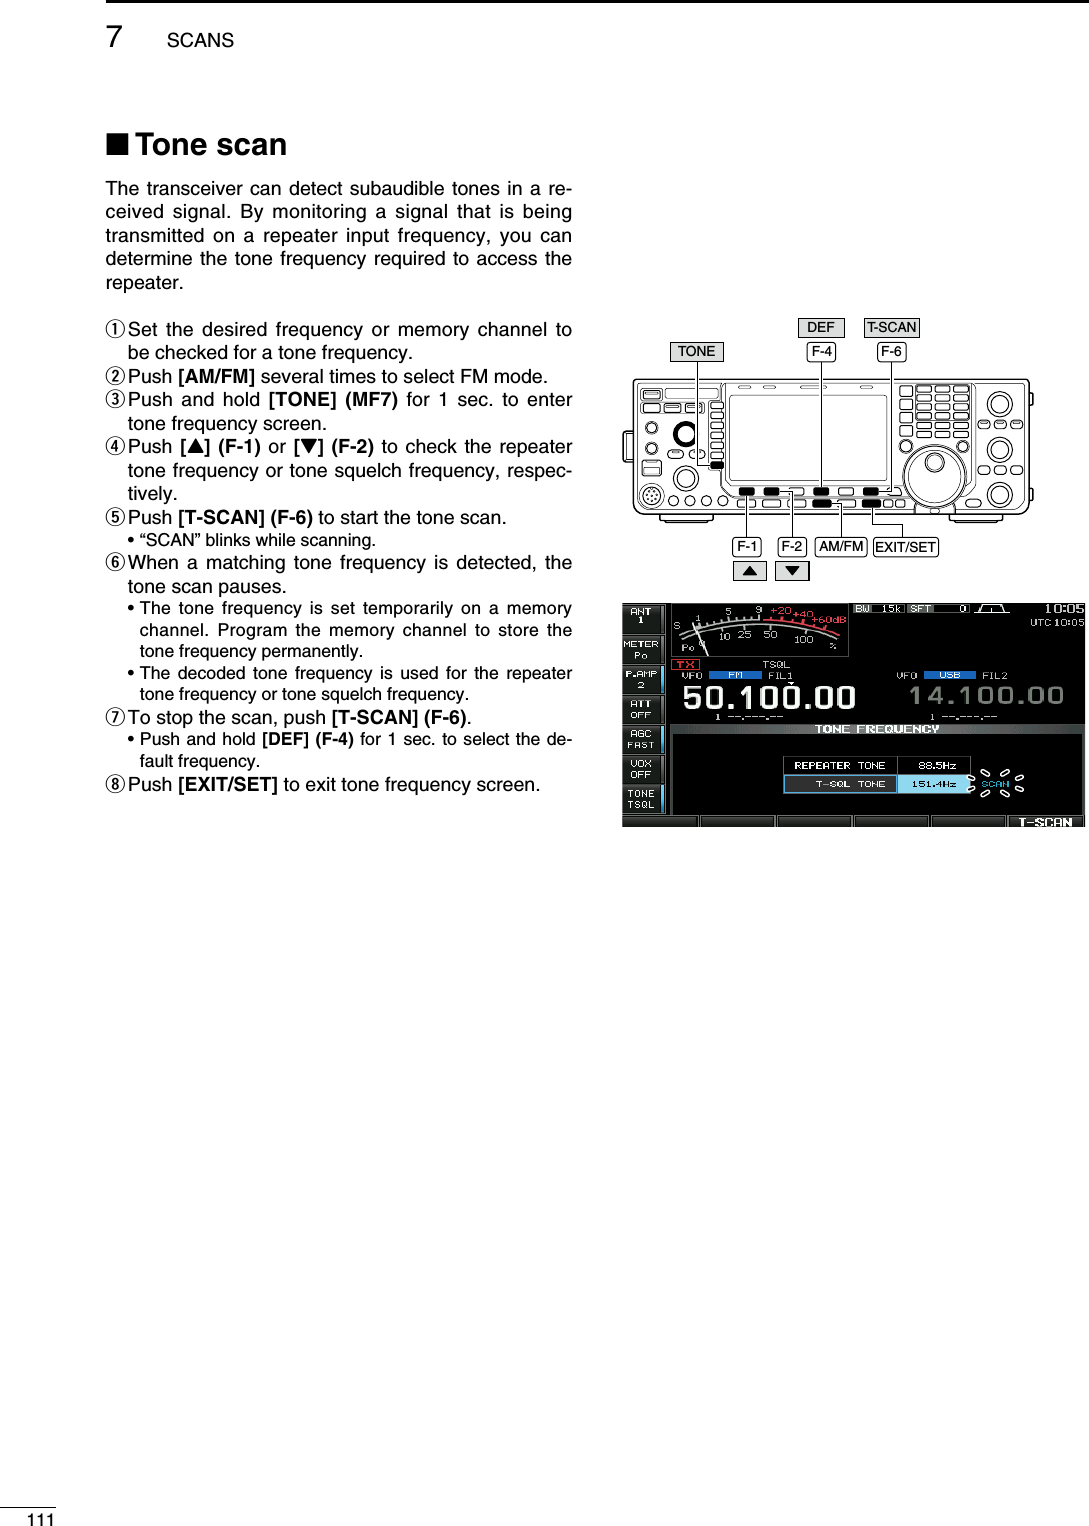 N Tone scanThe transceiver can detect subaudible tones in a re-ceived signal. By monitoring a signal that is being transmitted on a repeater input frequency, you can determine the tone frequency required to access the repeater.q  Set the desired frequency or memory channel to be checked for a tone frequency.w  Push [AM/FM] several times to select FM mode.e  Push and hold [TONE] (MF7) for 1 sec. to enter tone frequency screen.r  Push [Y] (F-1) or [Z] (F-2) to check the repeater tone frequency or tone squelch frequency, respec-tively.t  Push [T-SCAN] (F-6) to start the tone scan.  • “SCAN” blinks while scanning.y  When a matching tone frequency is detected, the tone scan pauses. •  The tone frequency is set temporarily on a memory channel. Program the memory channel to store the tone frequency permanently. •  The decoded tone frequency is used for the repeater tone frequency or tone squelch frequency.u  To stop the scan, push [T-SCAN] (F-6). •  Push and hold [DEF] (F-4) for 1 sec. to select the de-fault frequency.i  Push [EXIT/SET] to exit tone frequency screen.F-1 F-2 EXIT/SETAM/FMTONET-SCANDEFF-4 F-61117SCANS